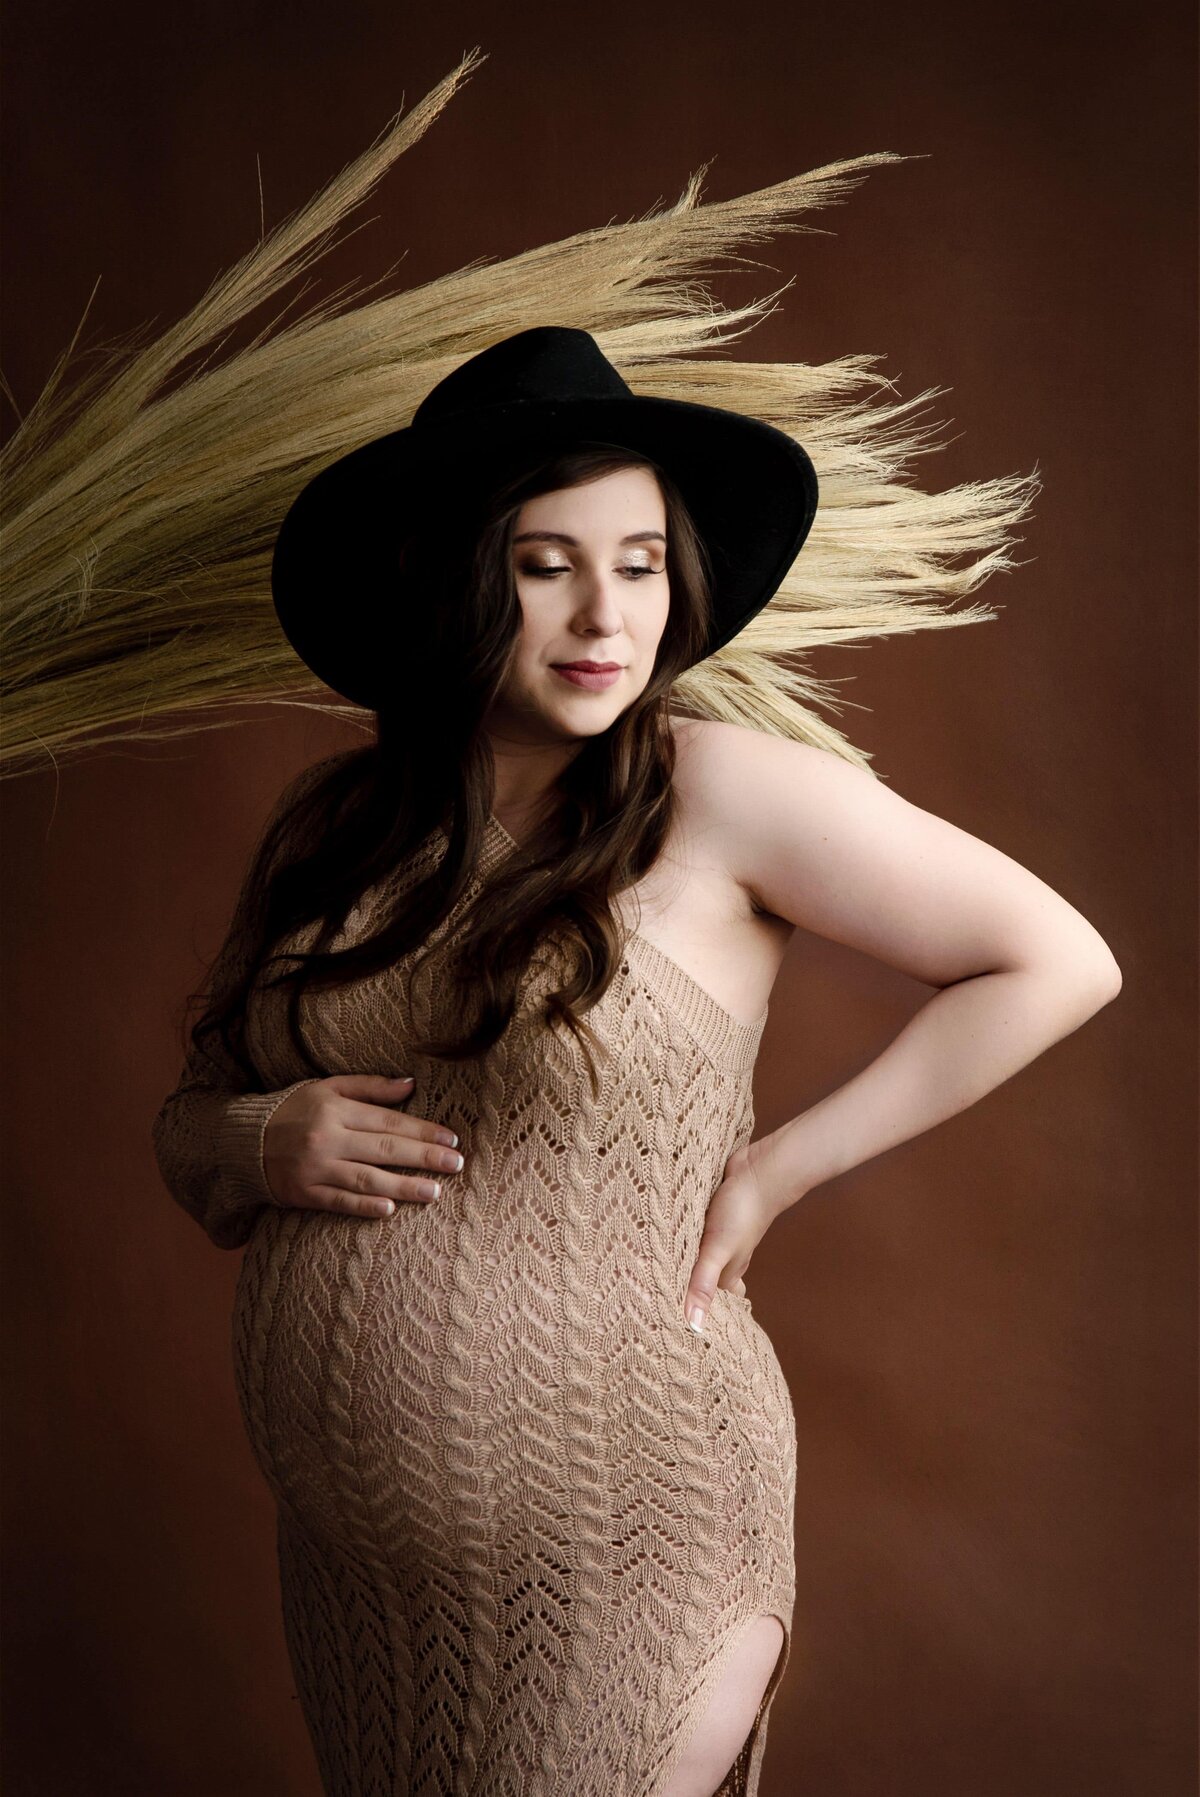 st-louis-maternity-photographer-pregnant-mom-in-sweater-dress-with-black-hat-and-dry-grass-background